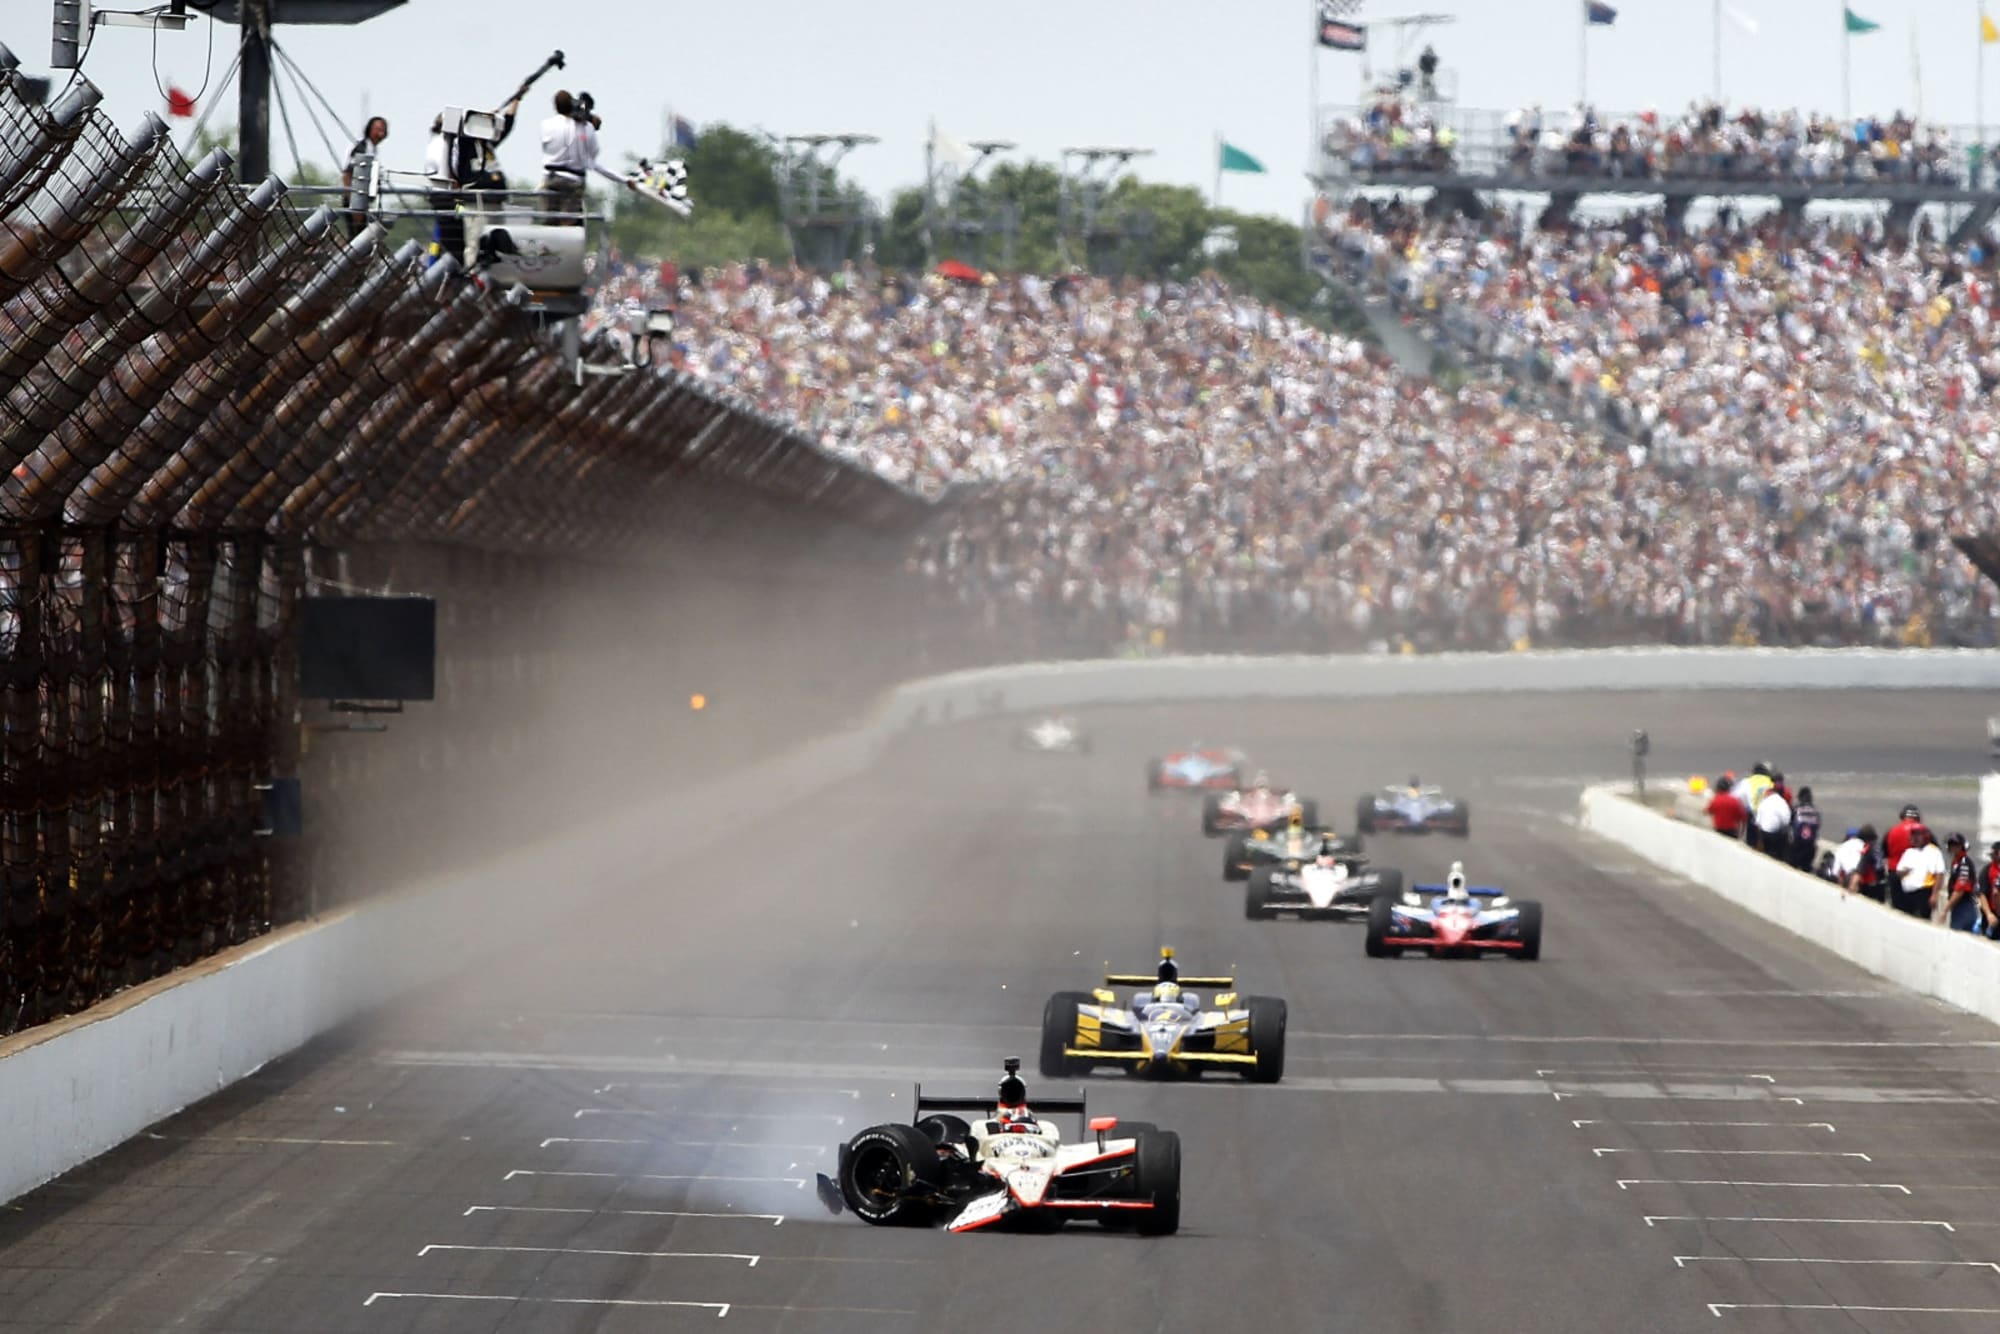 IndyCar The most bizarre, heartbreaking Indy 500 finish ever